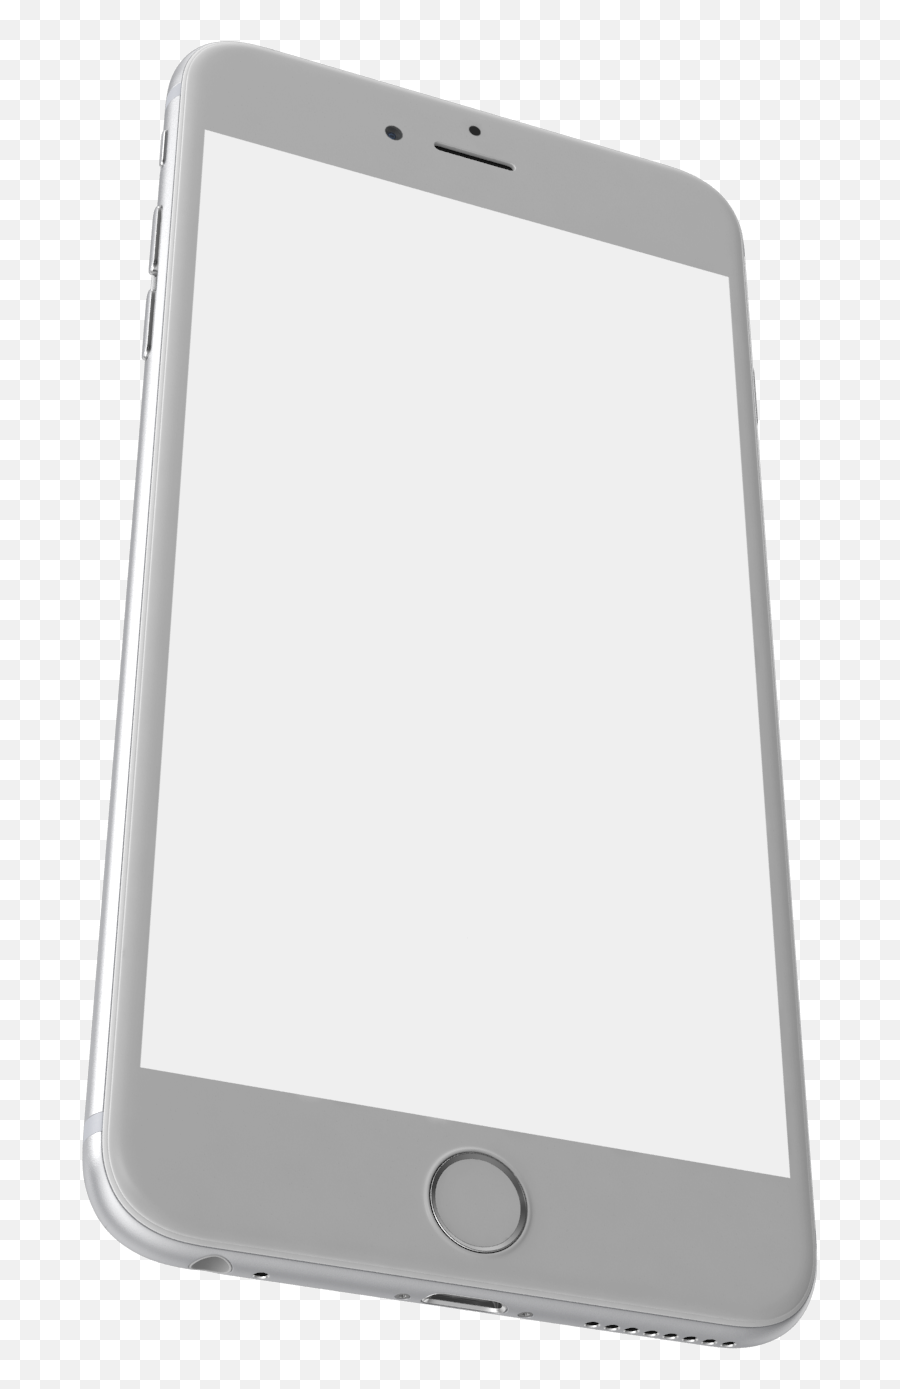 Download Iphone 6 Plus Silver Png Image